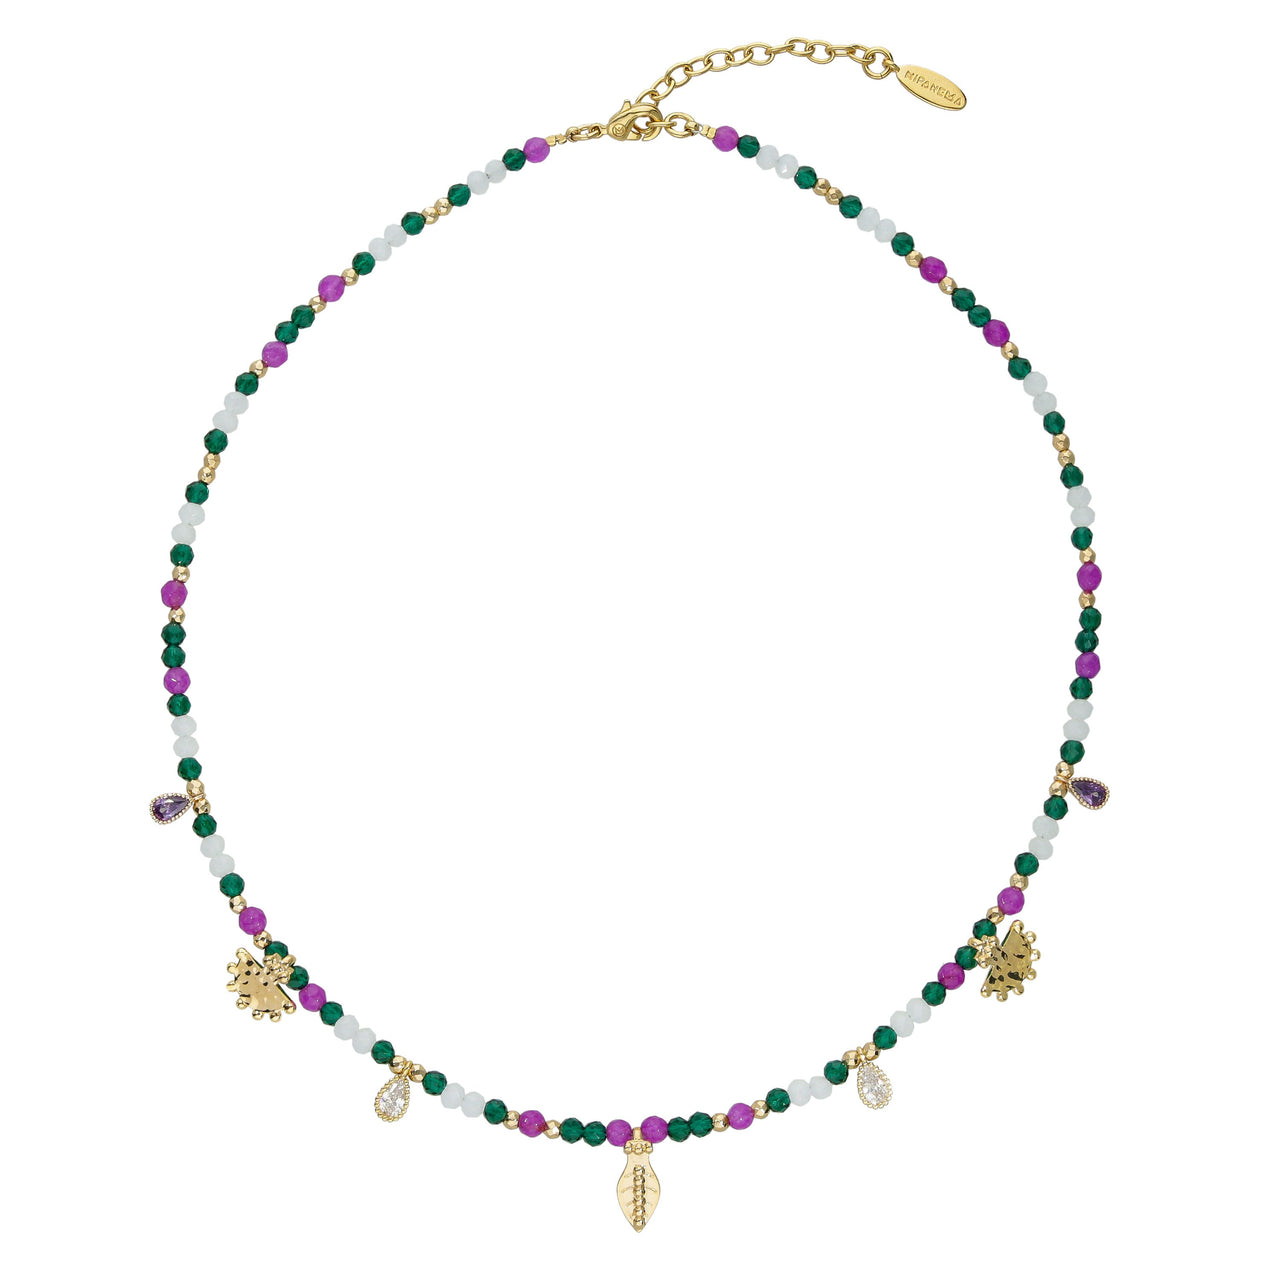 GREEN SIMAR NECKLACE